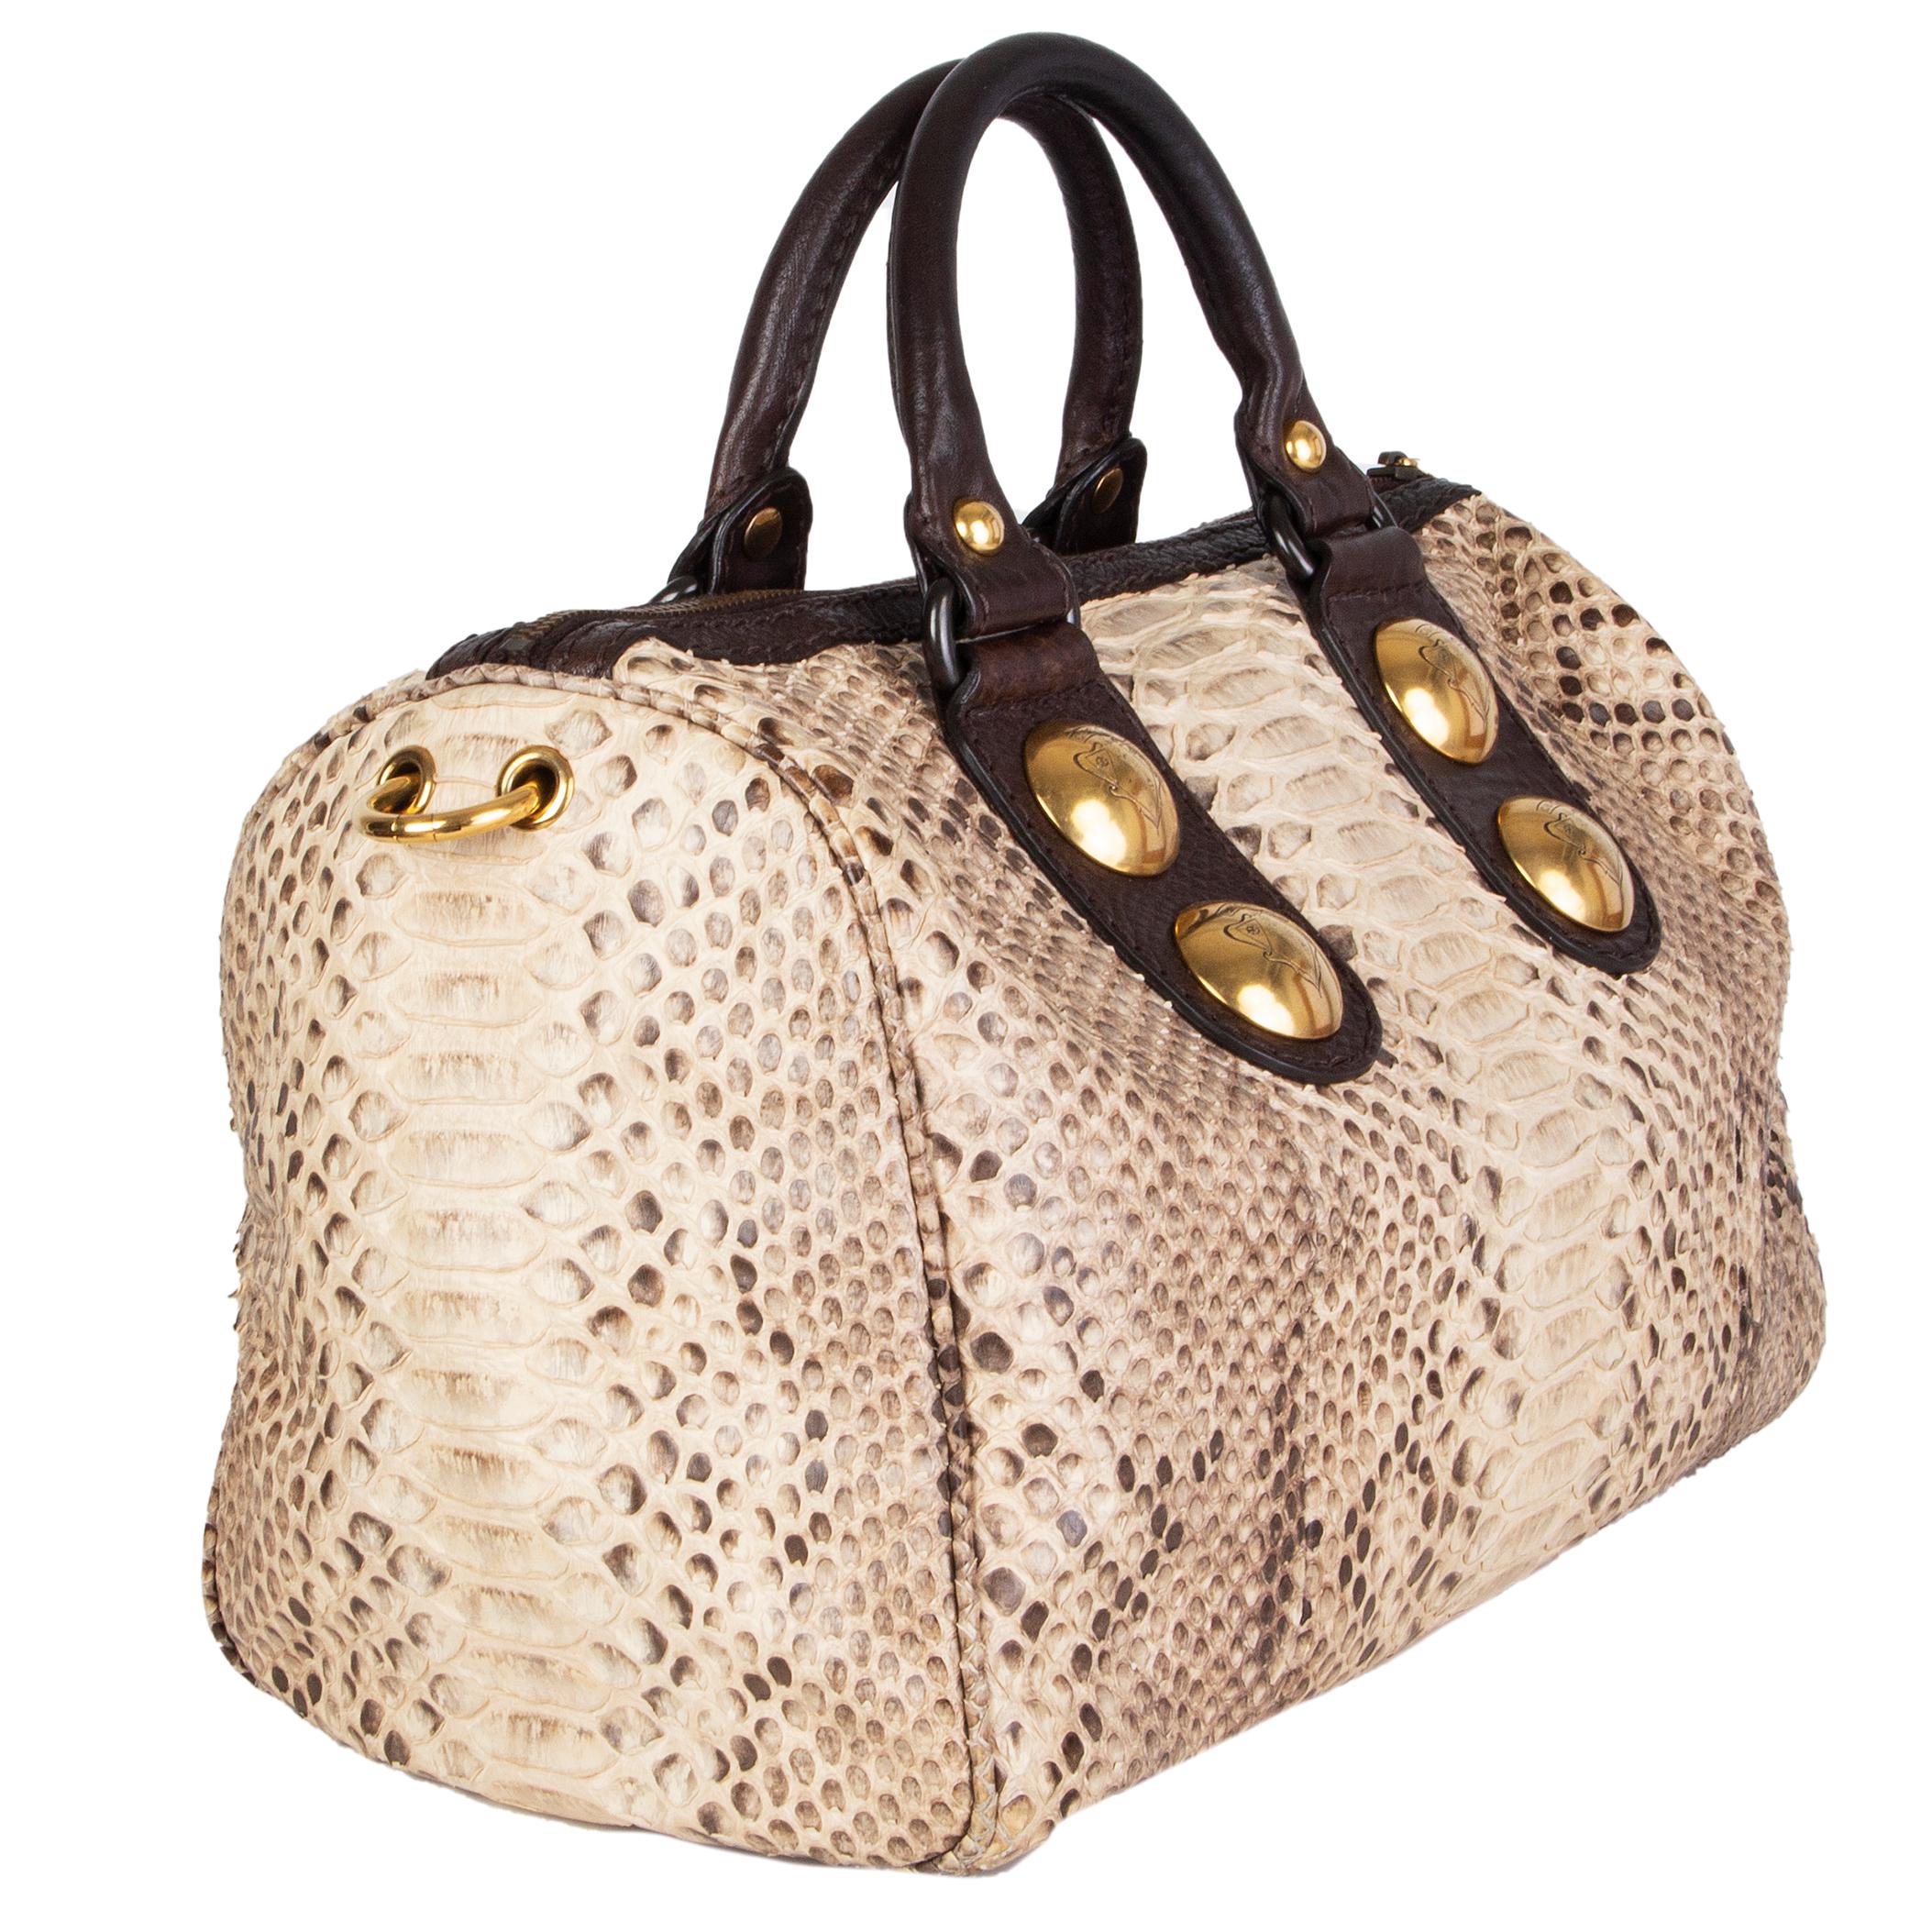 Gucci 'Python Baboushka Boston' bag in beige snakeskin with large studes. Closes with a zipper on top. Lined in black logo nylon with an open pocket against the front and a zipper pocket against the back. Has been carried with minor signs of wear to